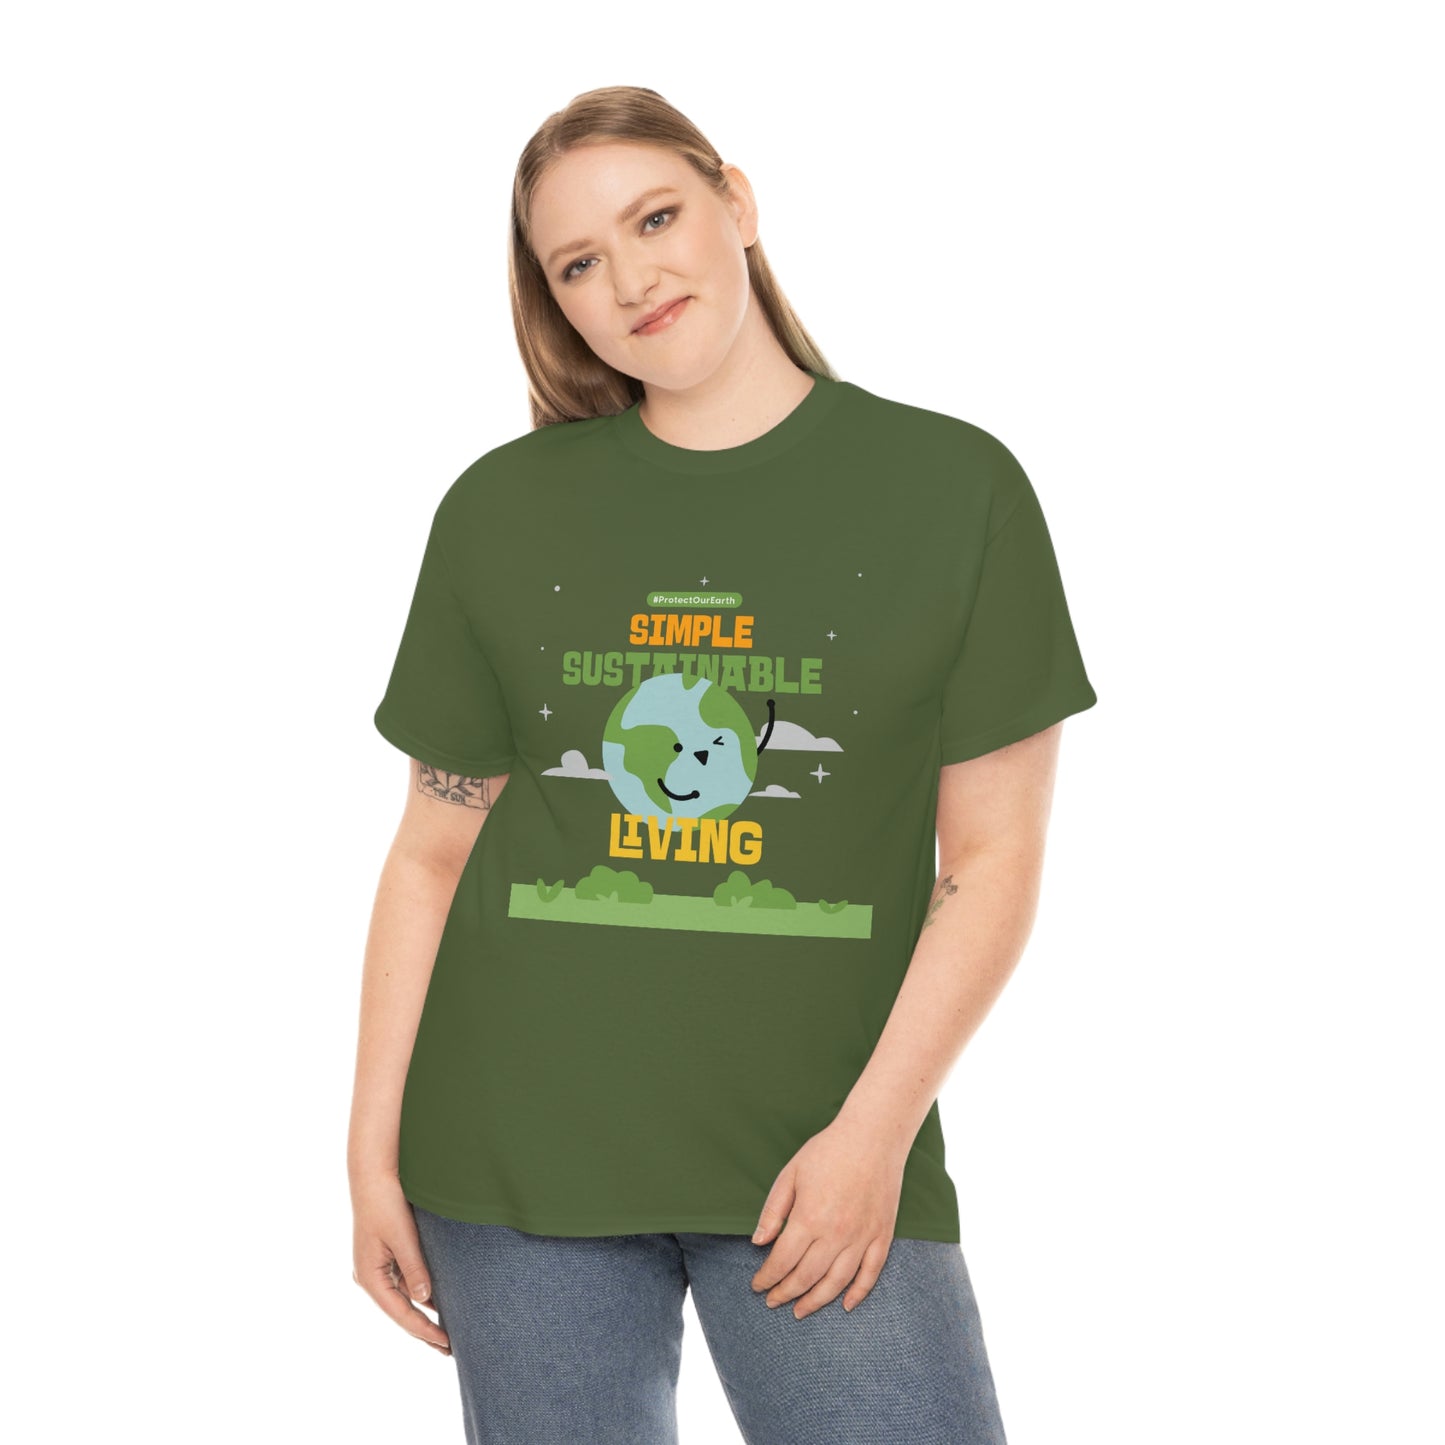 Mock up of a blonde haired woman wearing the green shirt